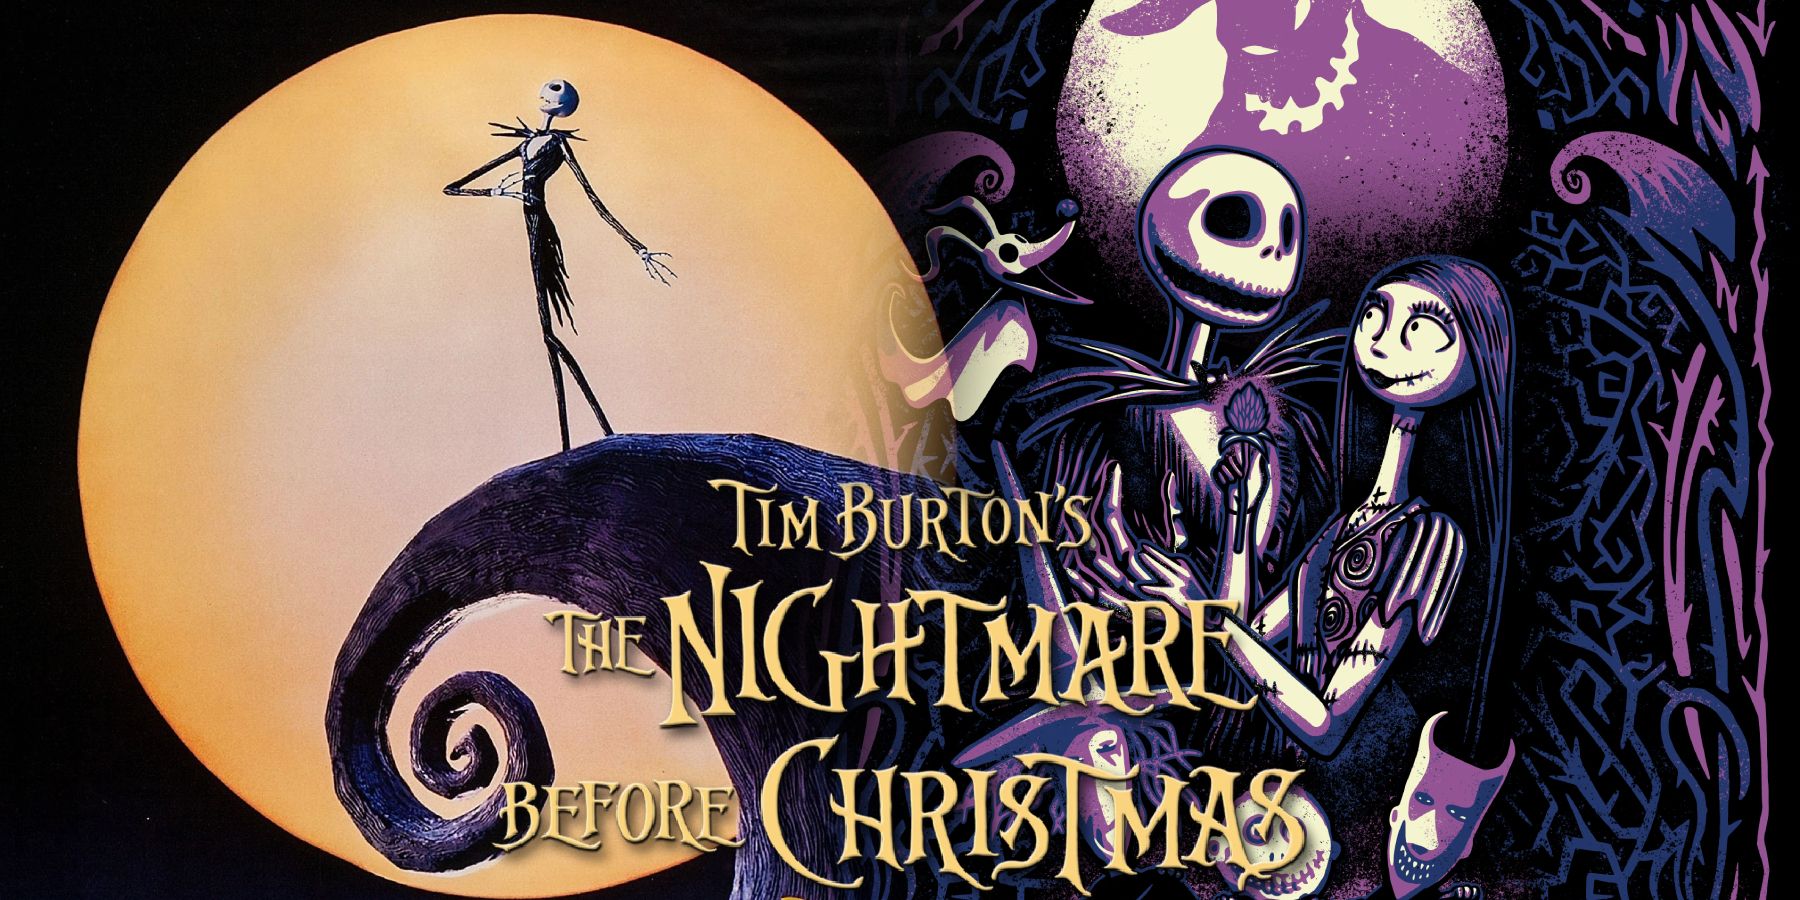 The Nightmare Before Christmas returns to theaters for one night